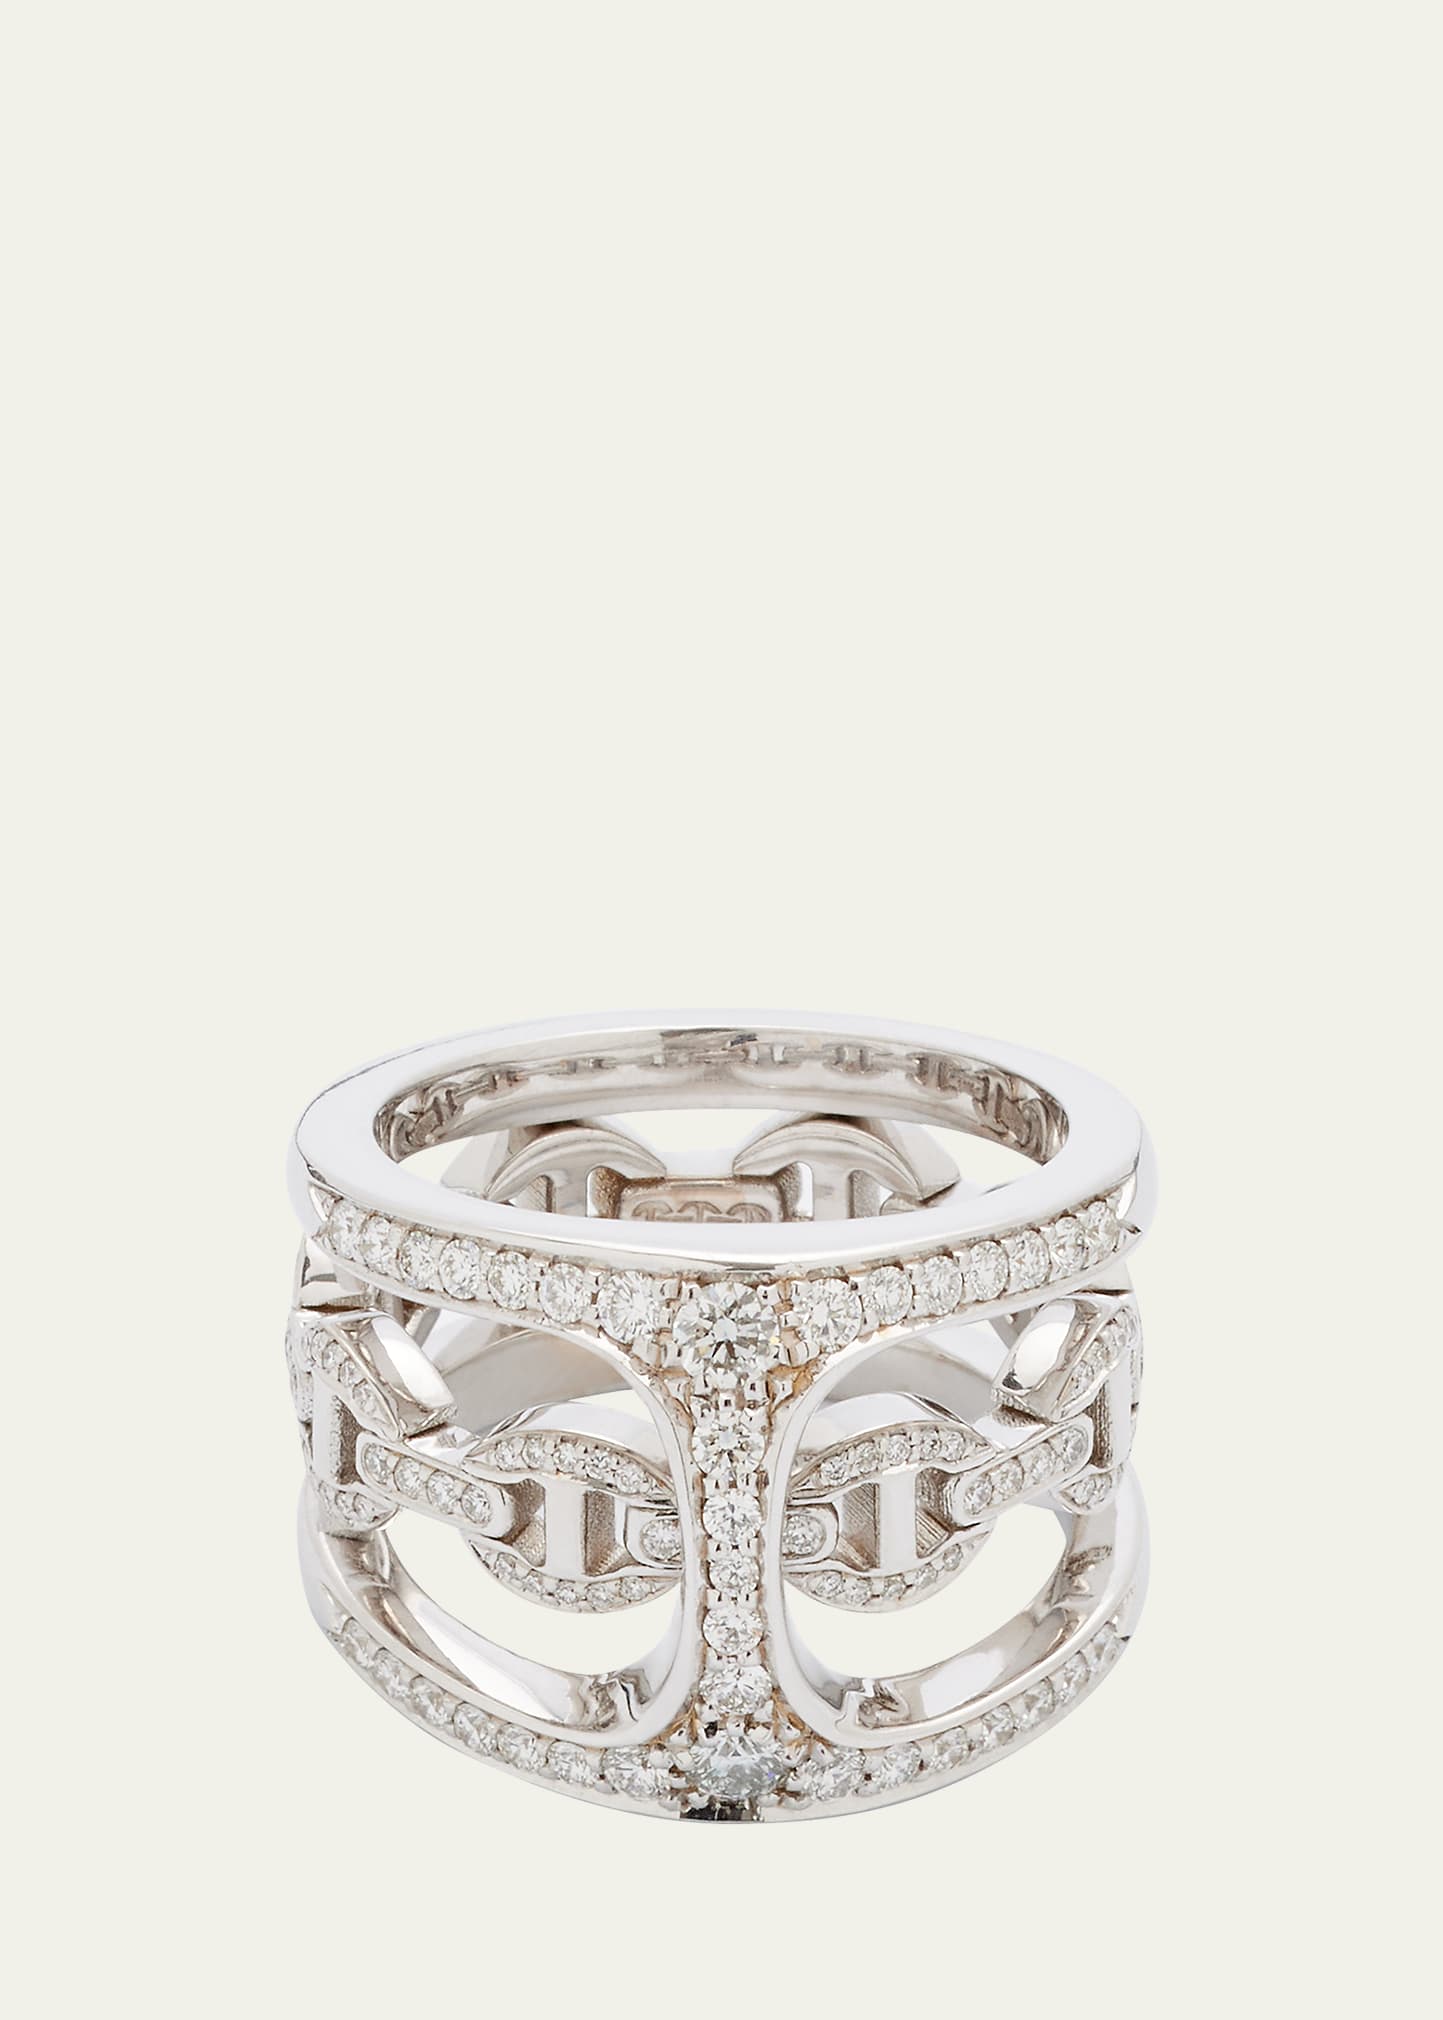 Dame Phantom Clique Antiquated Ring in 18K White Gold and Diamonds